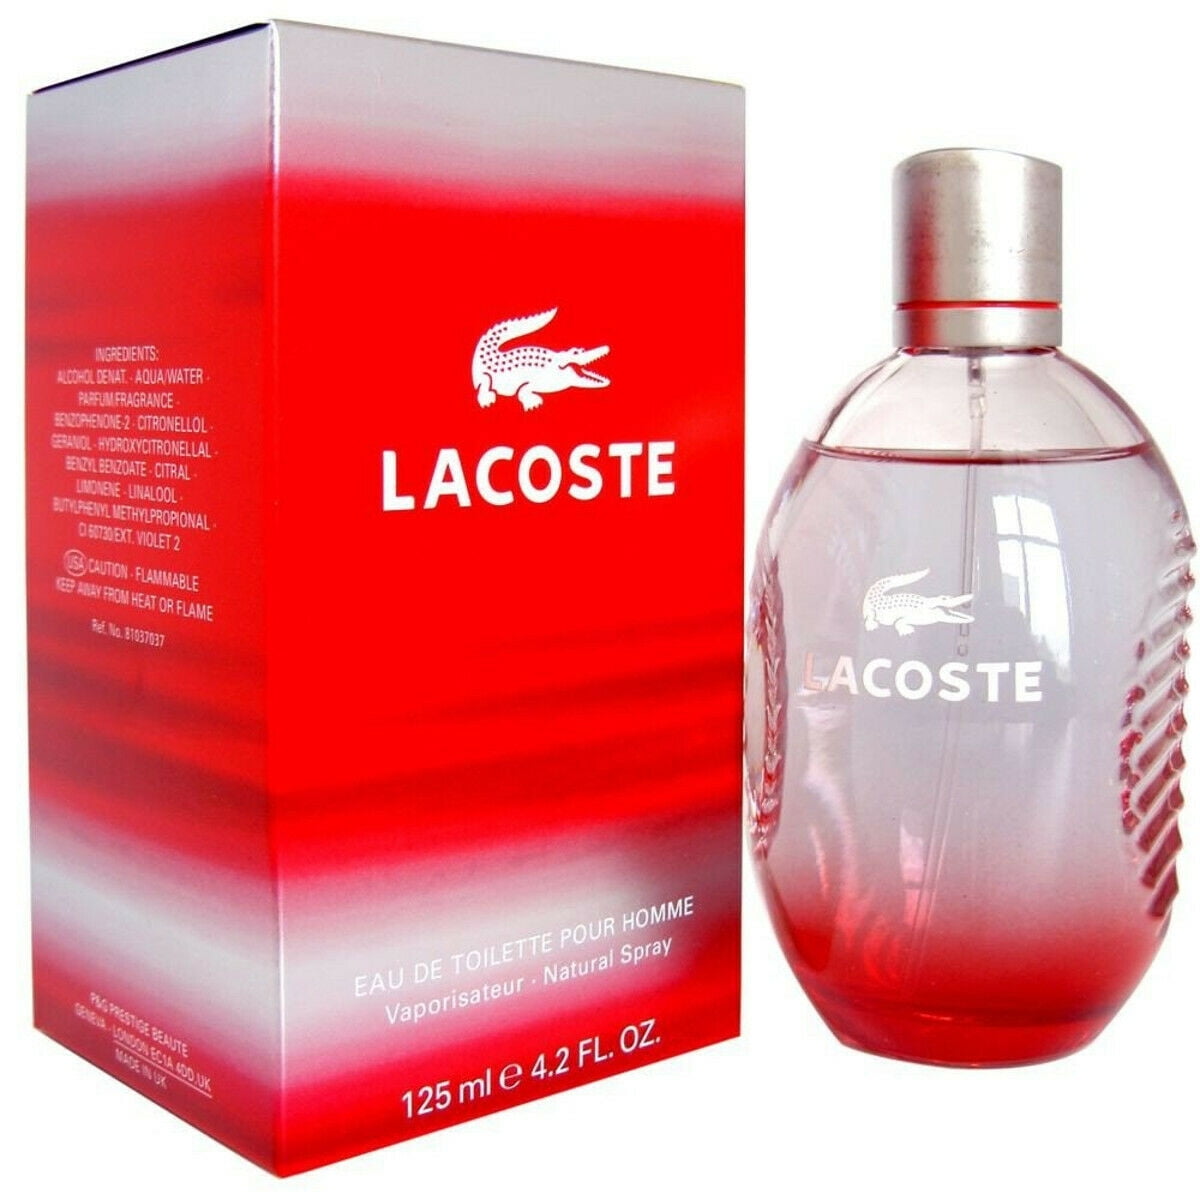 lacoste men's cologne red